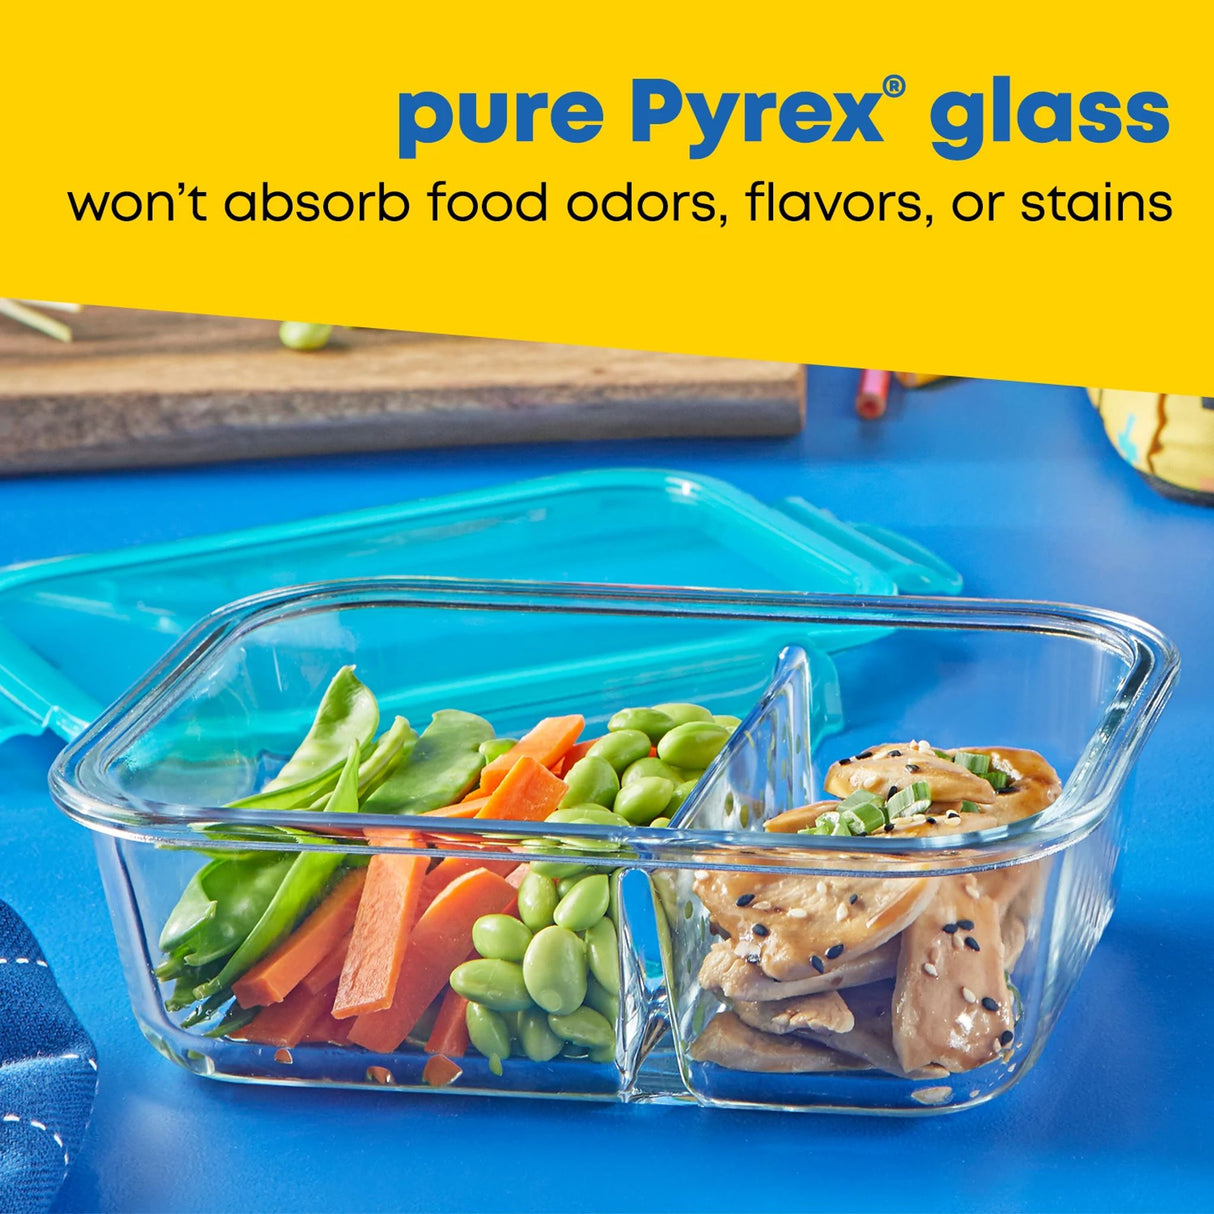  MealBox™ 2.3-cup Divided Glass Food Storage Container Lid text pure Pyrex glass won't absorb odors flavors or stains